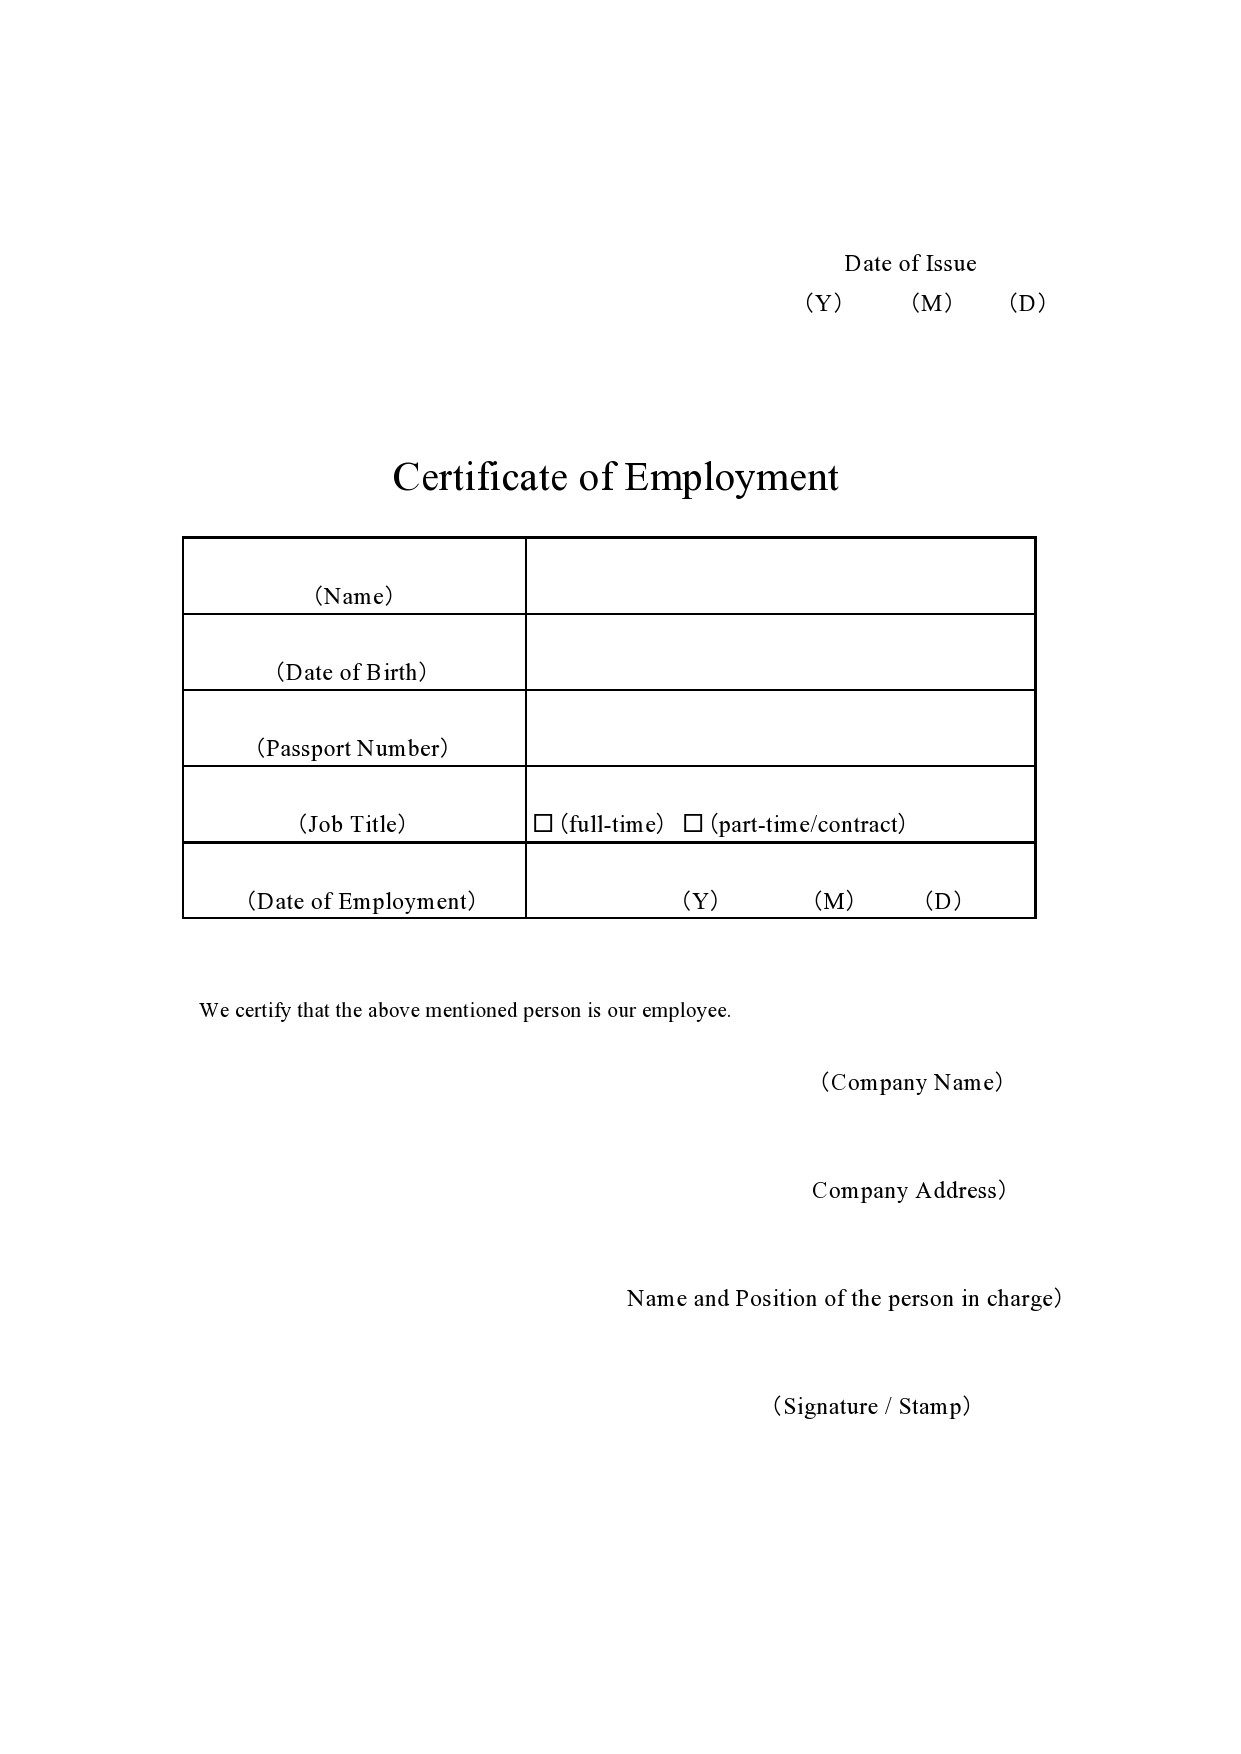 40 Best Certificate Of Employment Samples [Free] ᐅ Templatelab Regarding Template Of Certificate Of Employment